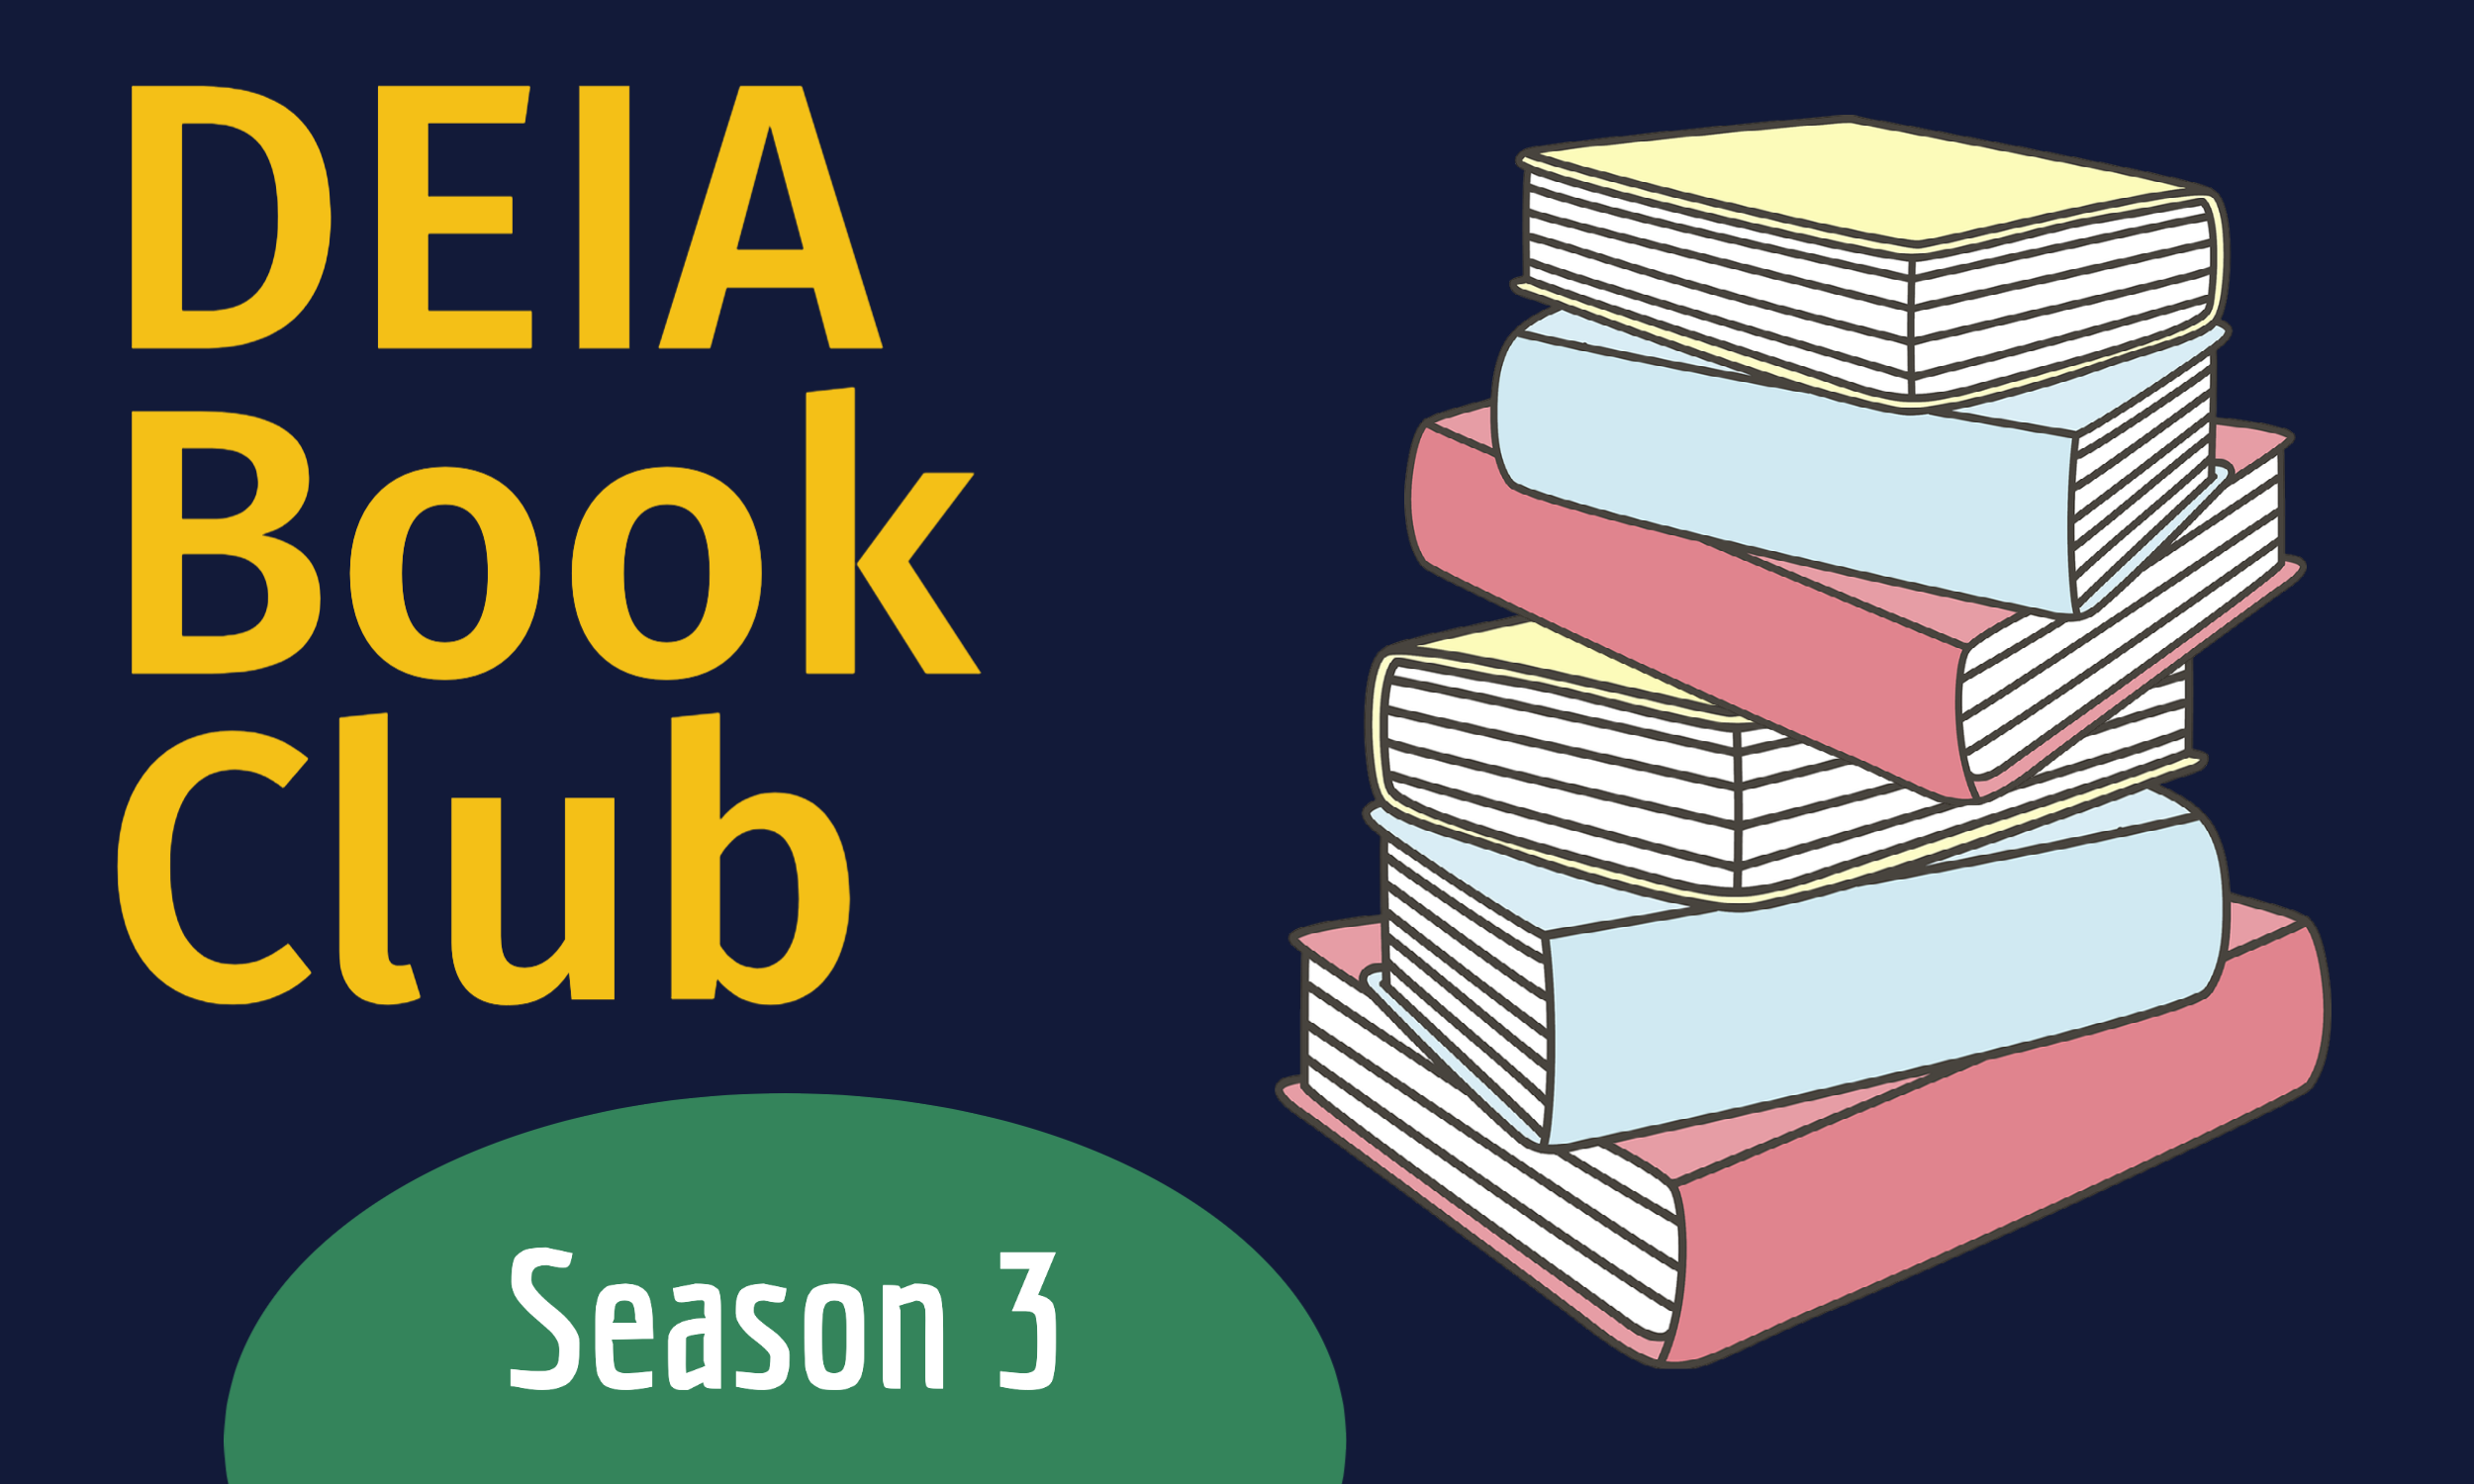 Title graphic for DEIA Book Club Season 3 with stack of books